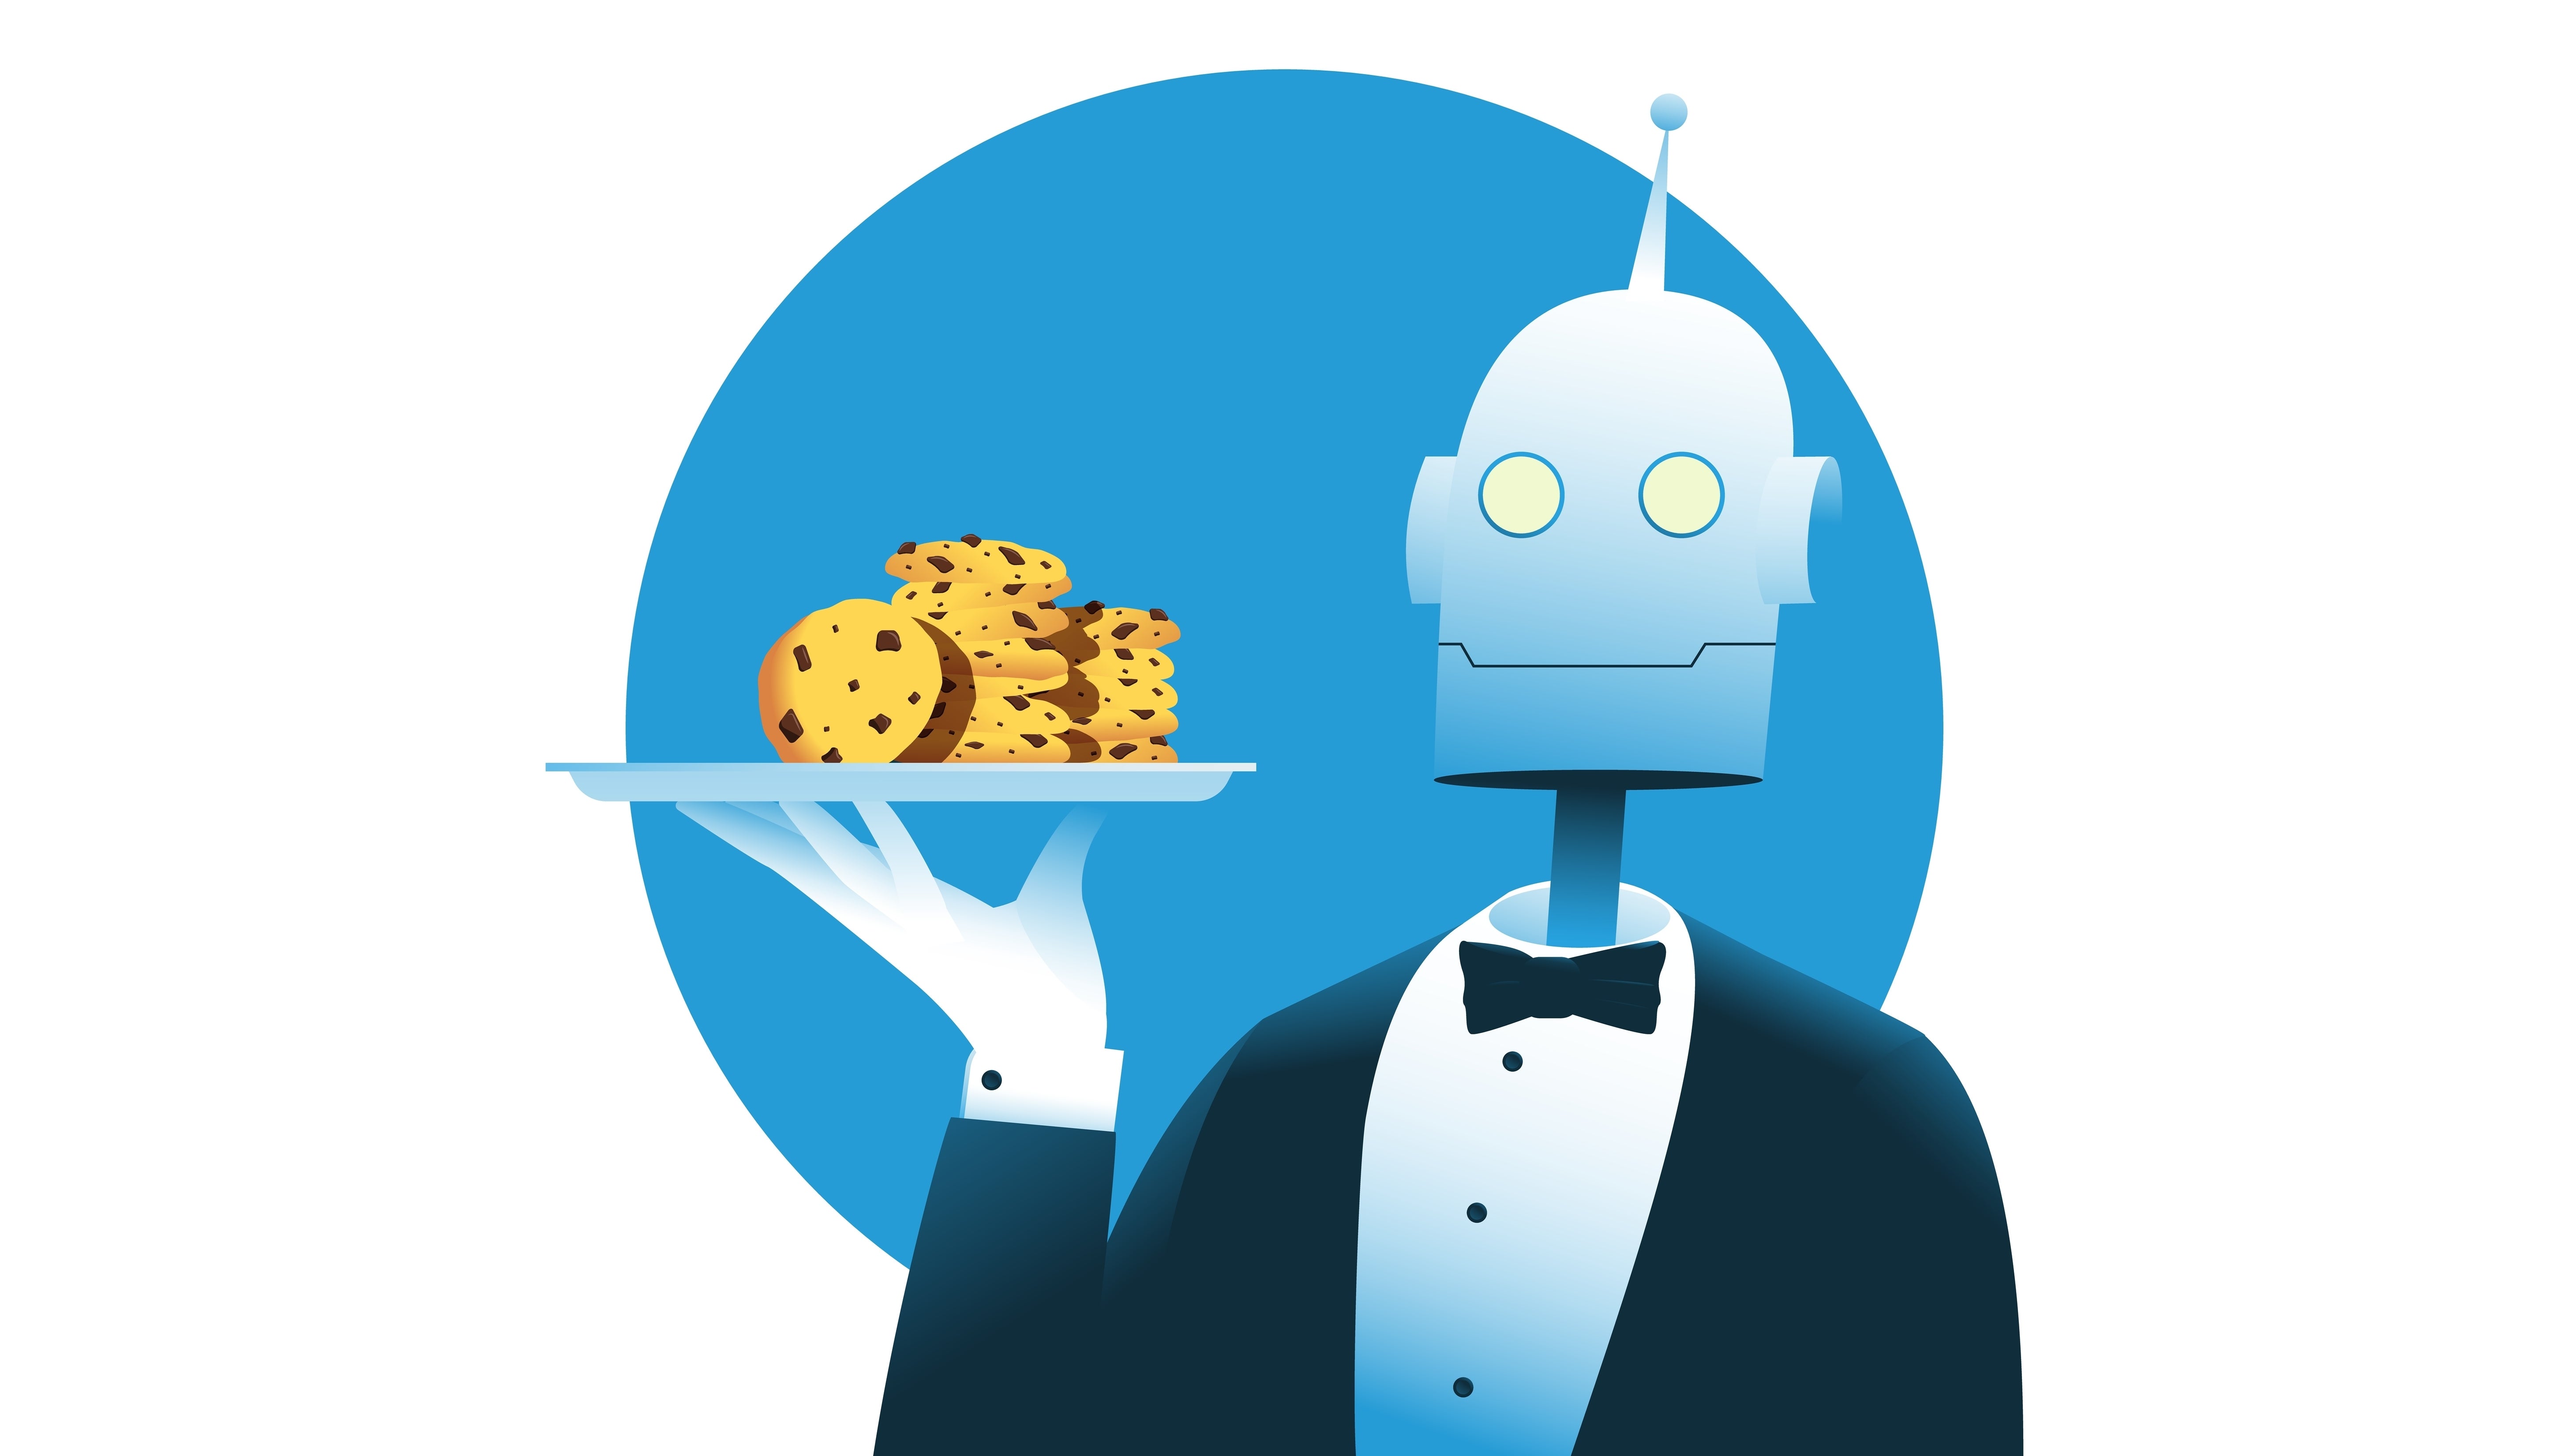 Robot holding a tray full of cookies. Internet privacy and security concept.